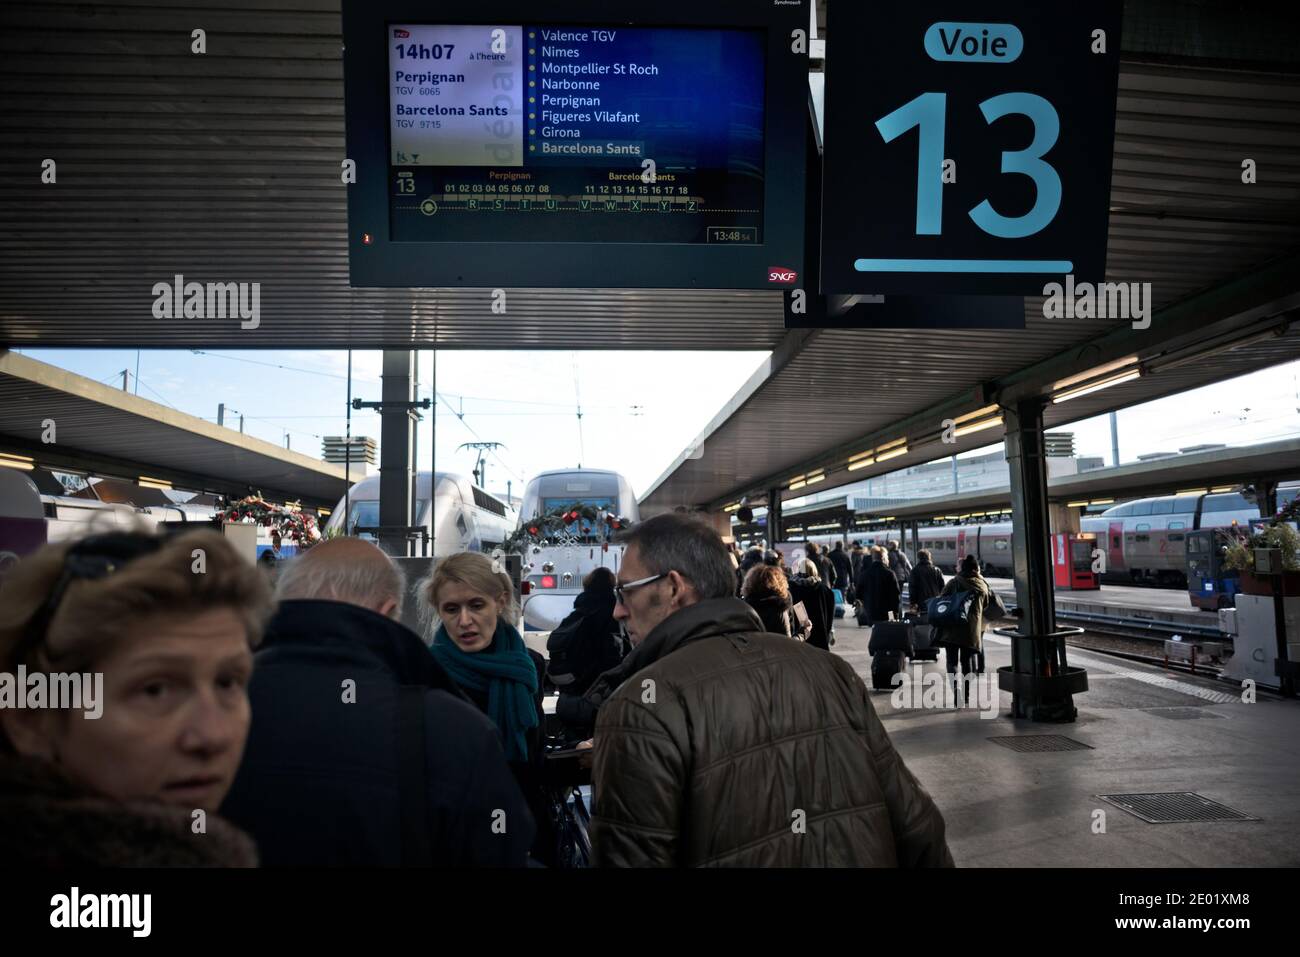 Atmosphere at Gare de Lyon station after the inauguration of the new TGV highspeed train line between France and Spain, in Paris, France on December 15, 2013. The new line which links Paris and Barcelona is jointly operated by the SNCF and its Spanish counterpart Renfe. Each day, two round trips will connect Paris to Barcelona. Photo by Nicolas Messyasz/ABACAPRESS.COM Stock Photo